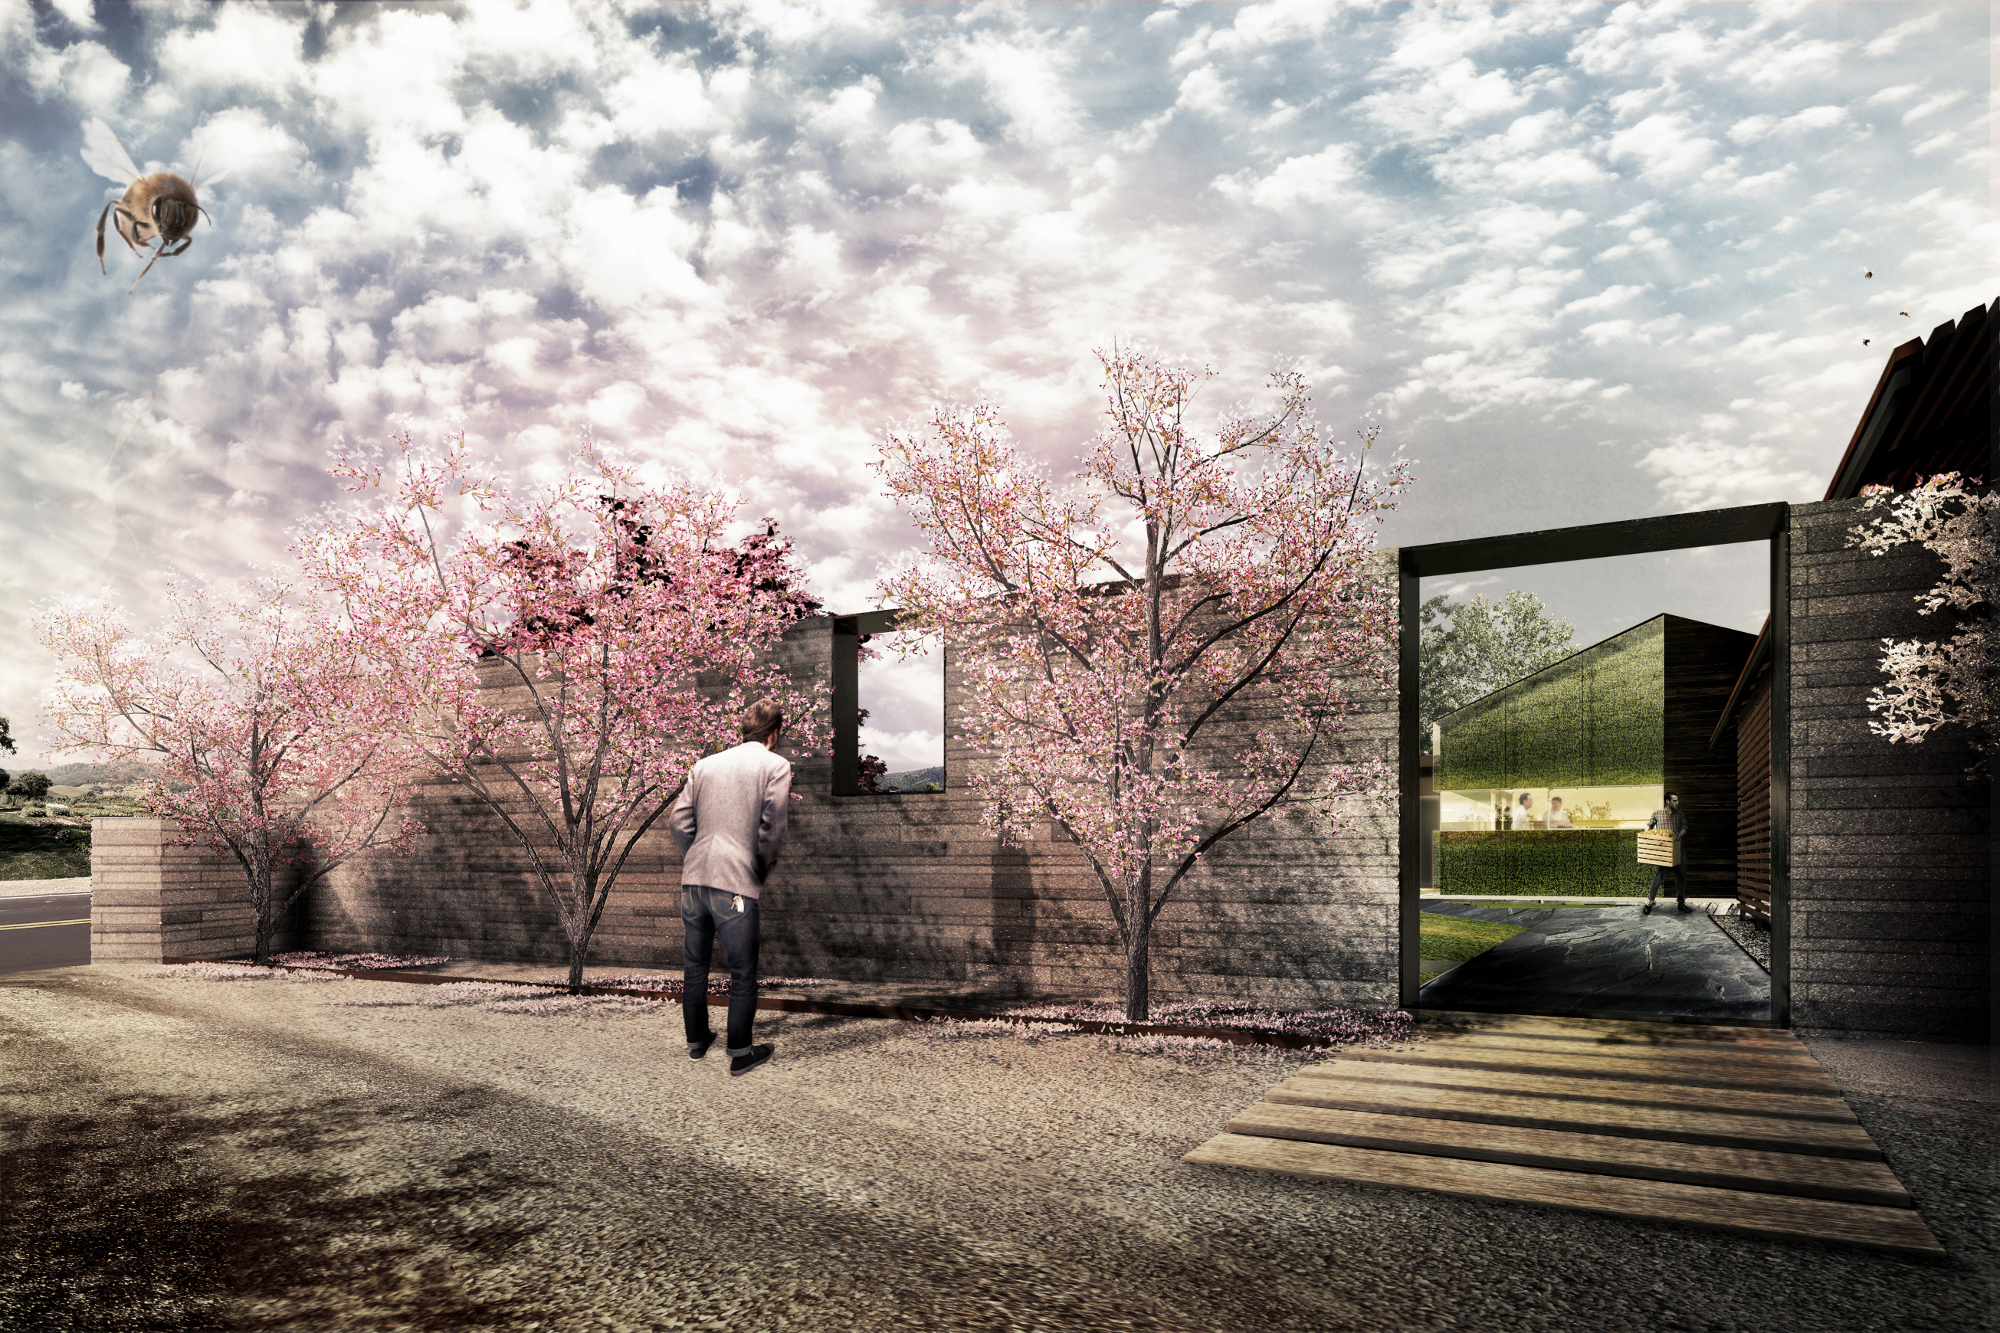 The French Laundry’s new landscape design will double the size of the existing garden and provide a new vehicular drop-off entry, extending the guest experience to the street edge. Rendering: Snøhetta